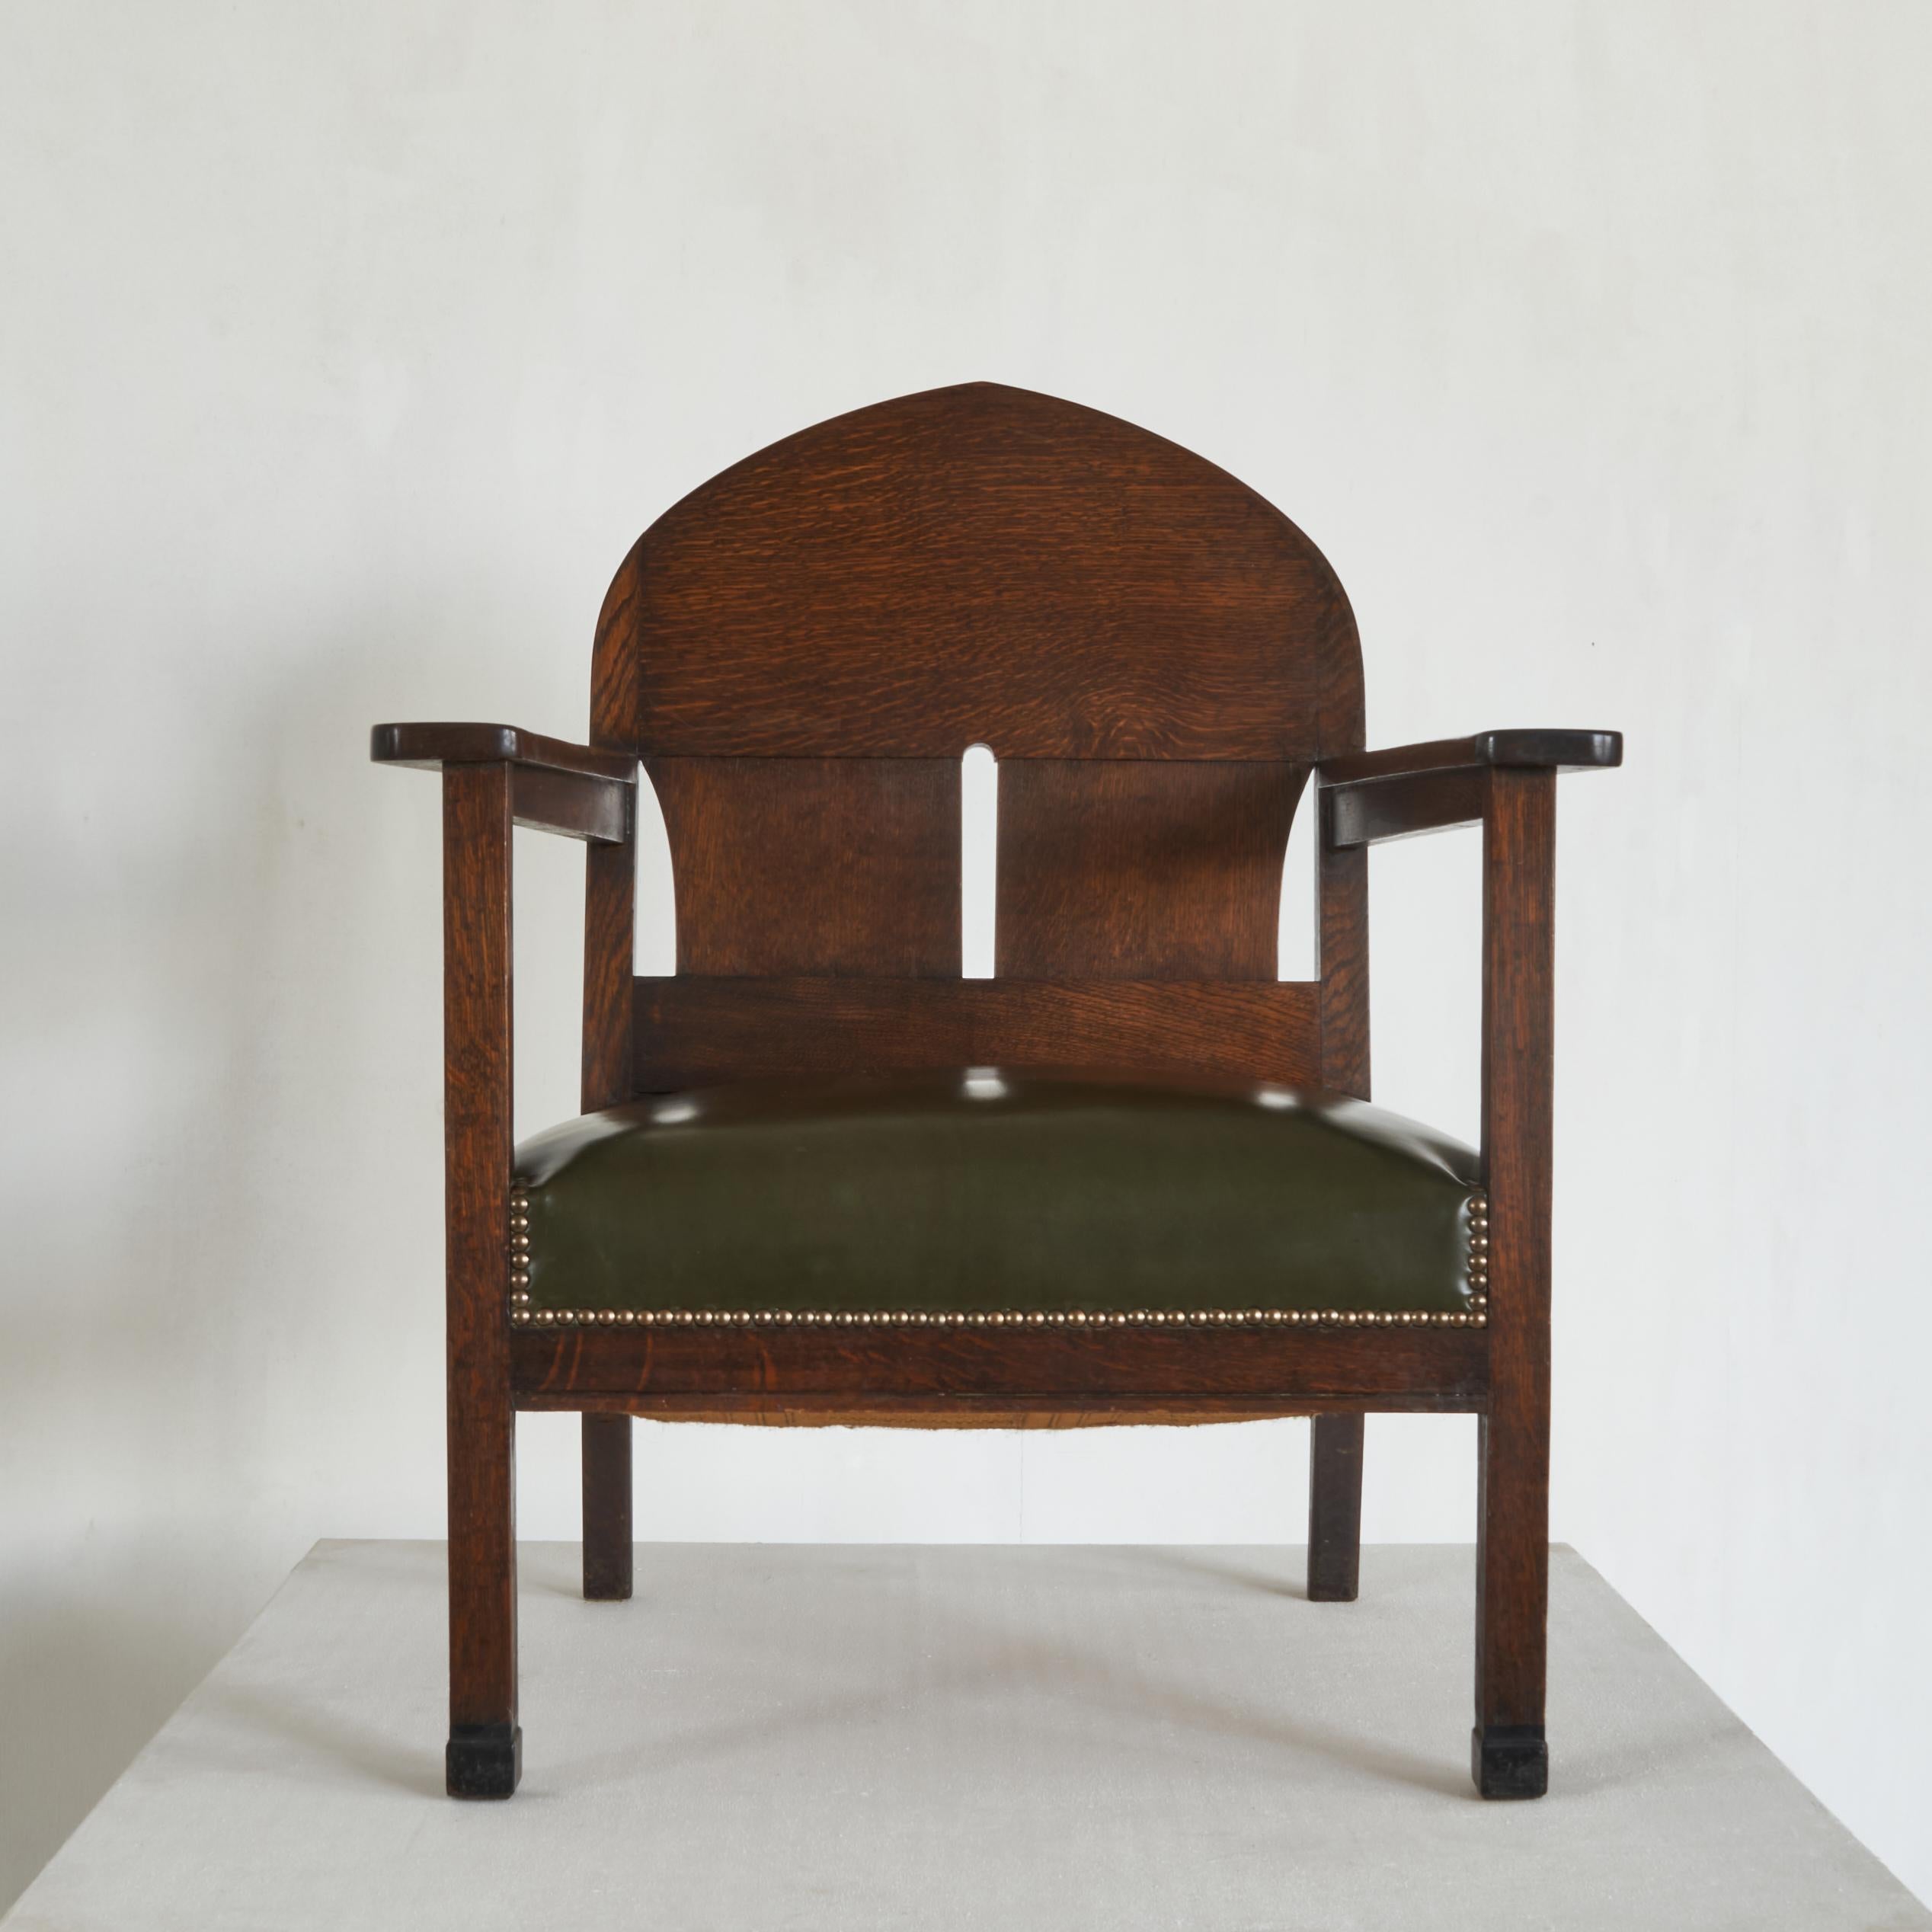 This easy chair made by designer and architect Harry Dreesen is a great example of early 20th century furniture design and combines both Gothic and Art Deco design elements.

It features great details like the Gothic back rest, elegant but sturdy